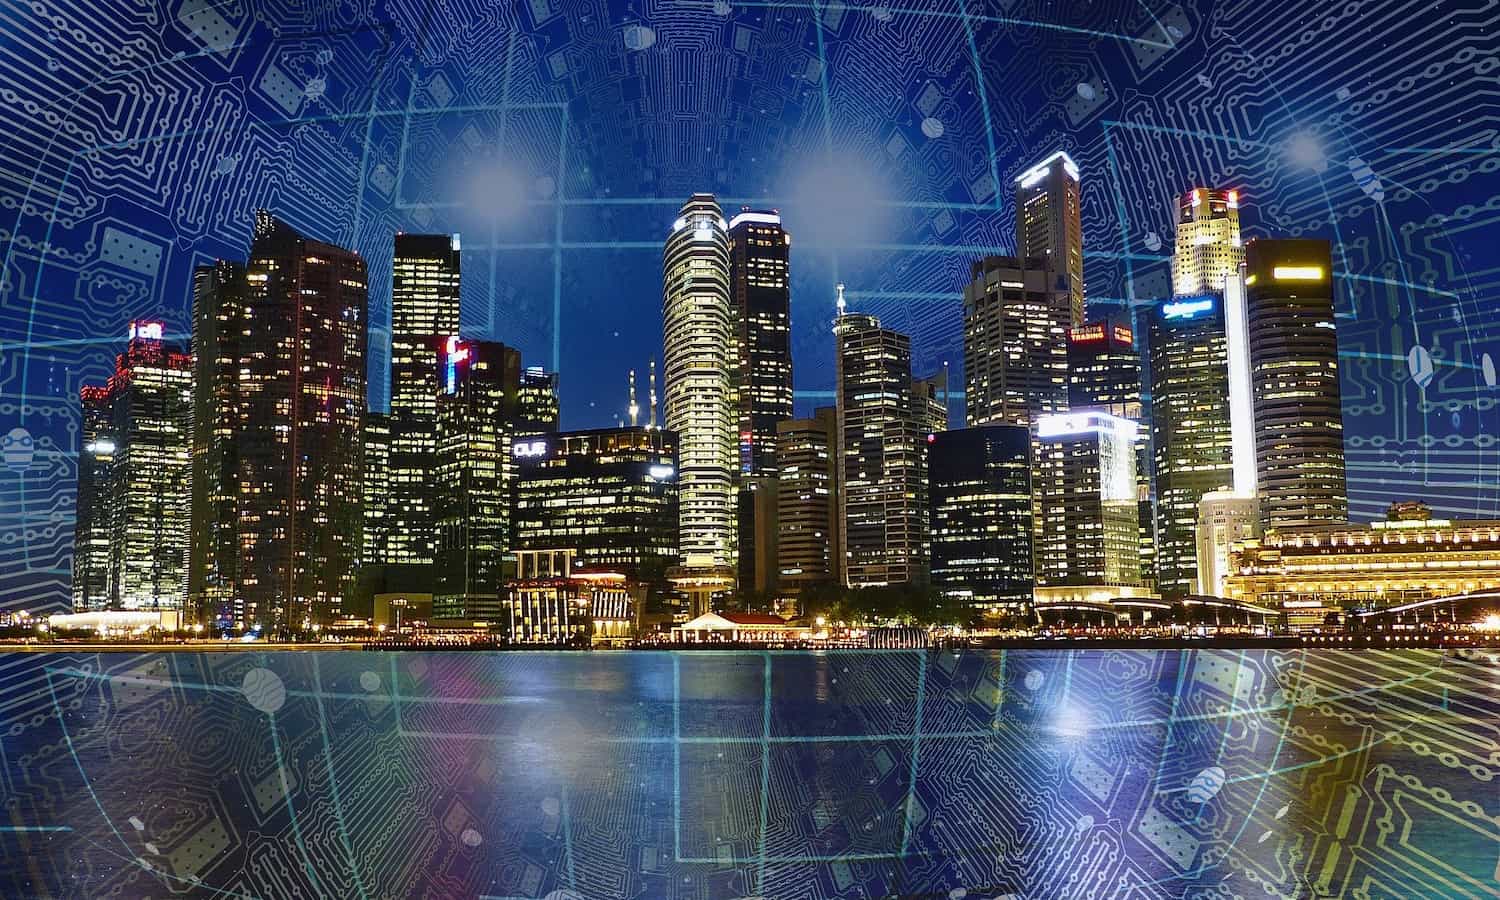 Outline of a city at night and how smart cities are built